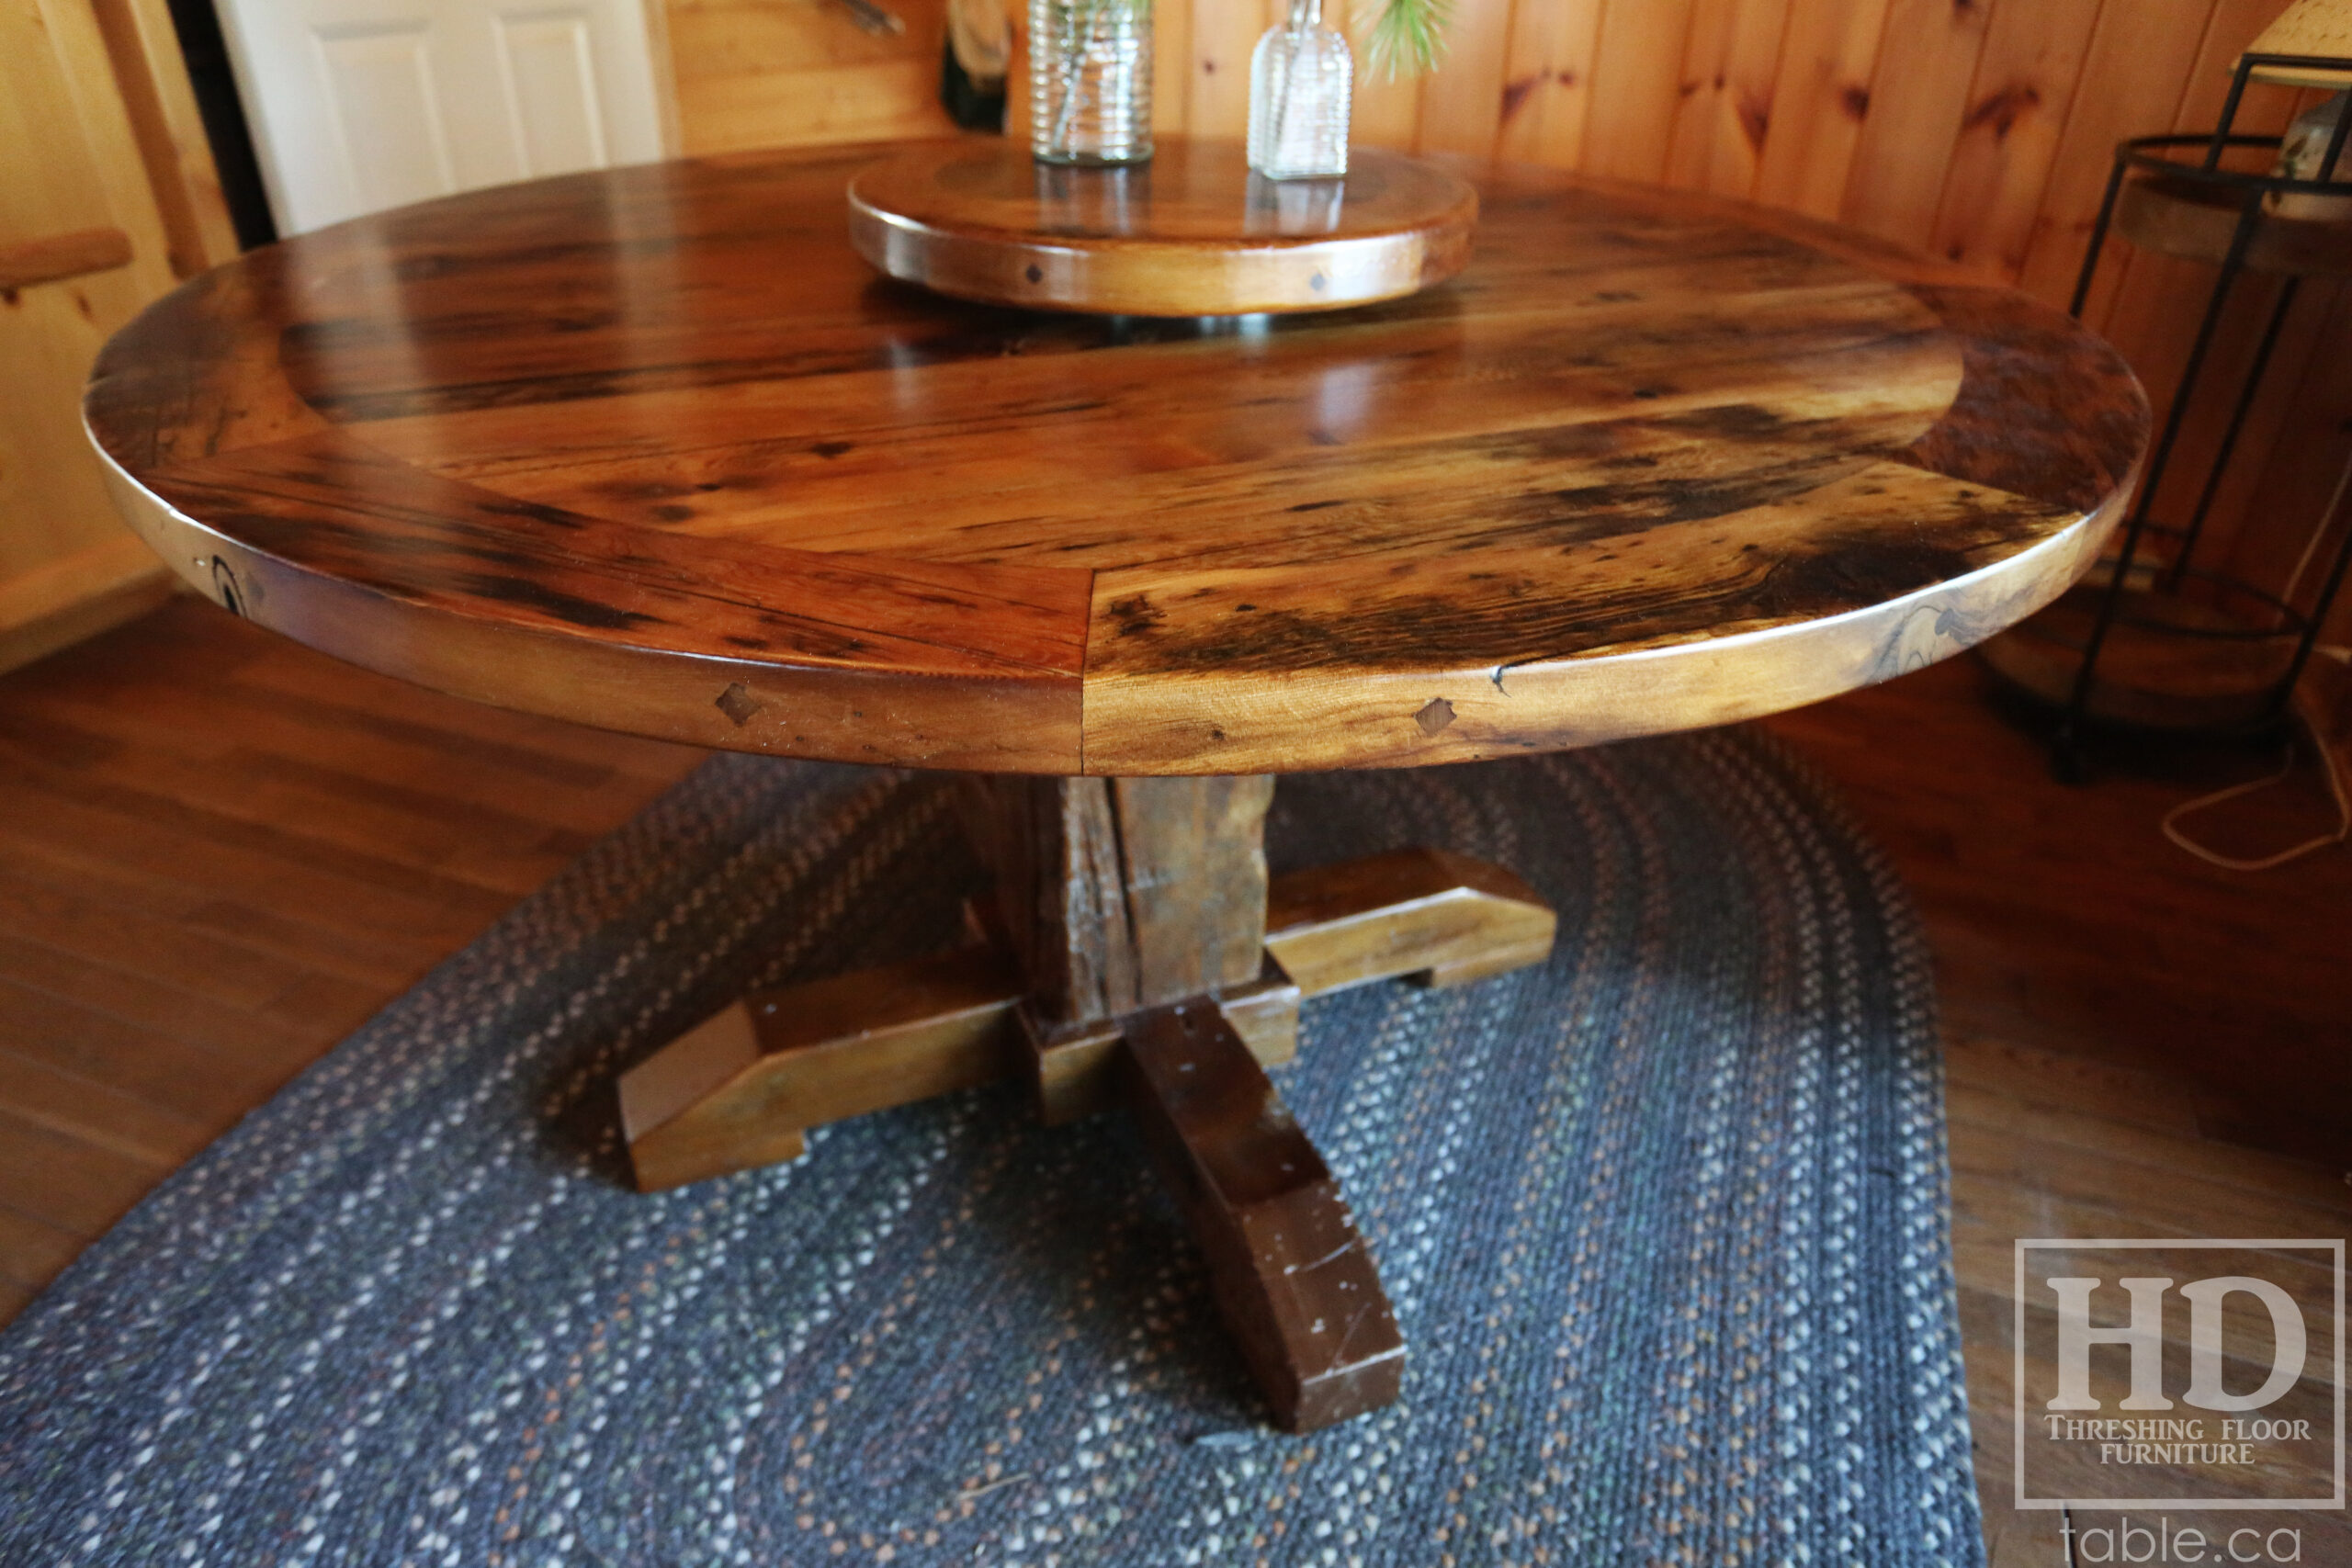 54” Reclaimed Ontario Barnwood Round Table we made for a Stoney Lake, Ontario cottage - Old Growth Hemlock Threshing Floor Construction – Hand-Hewn Beam Pedestal Base - Original edges & distressing maintained – Circular Bread Edge Boards – Premium epoxy + satin polyurethane finish – 18” Round Lazy Susan - www.table.ca